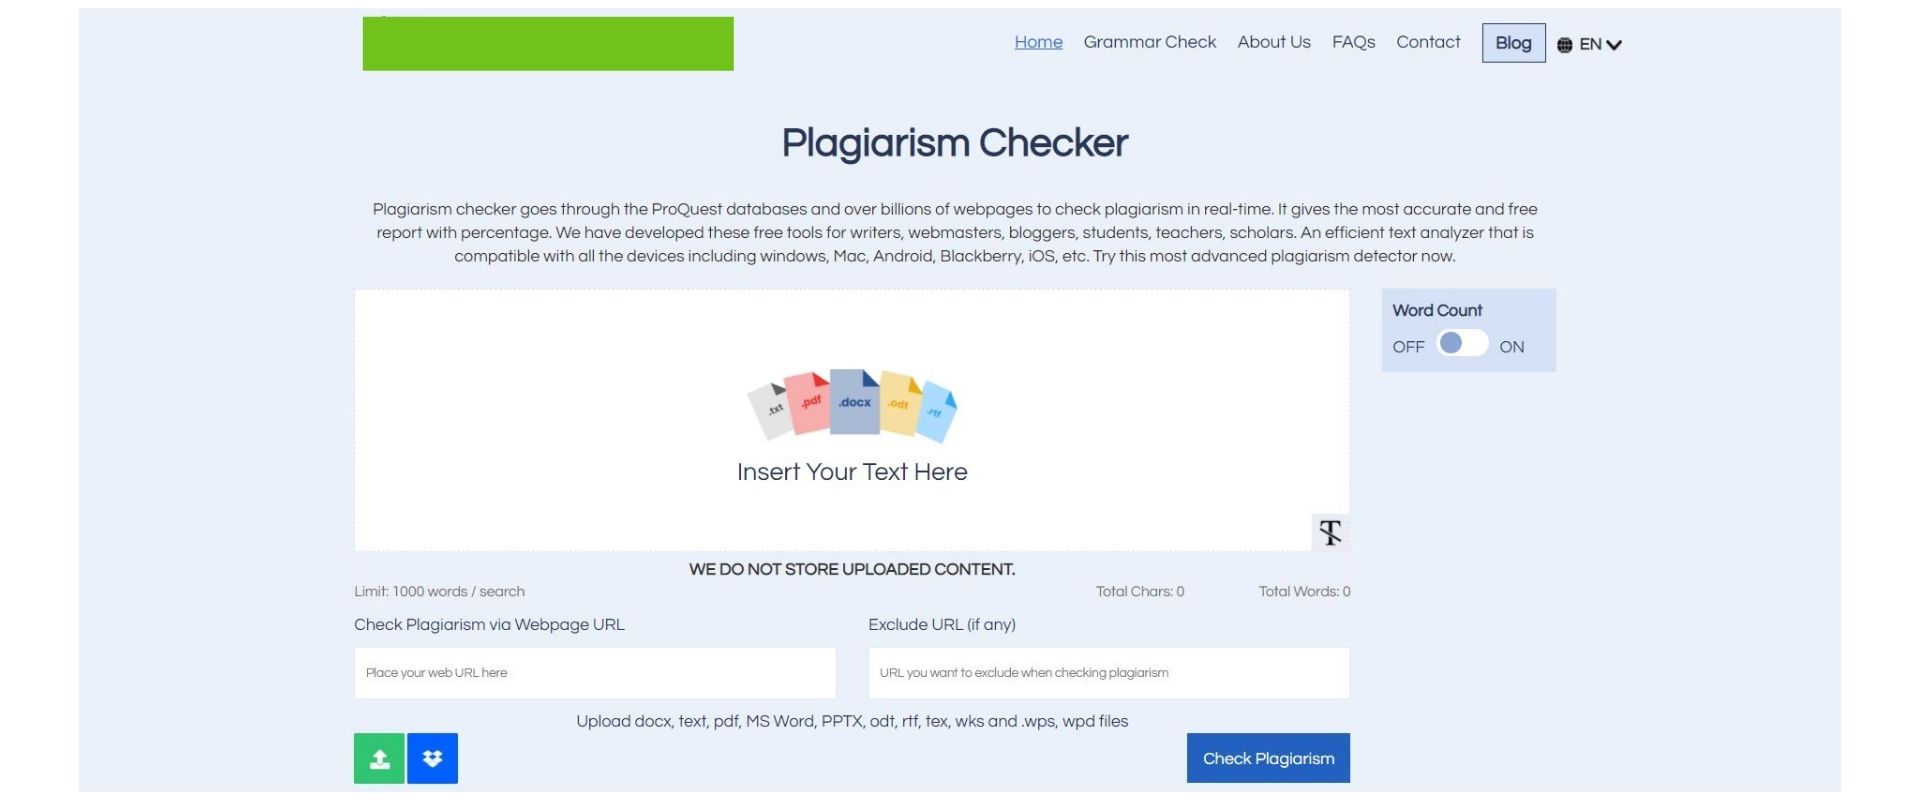 Homepage of Plagiarism Checker tool.